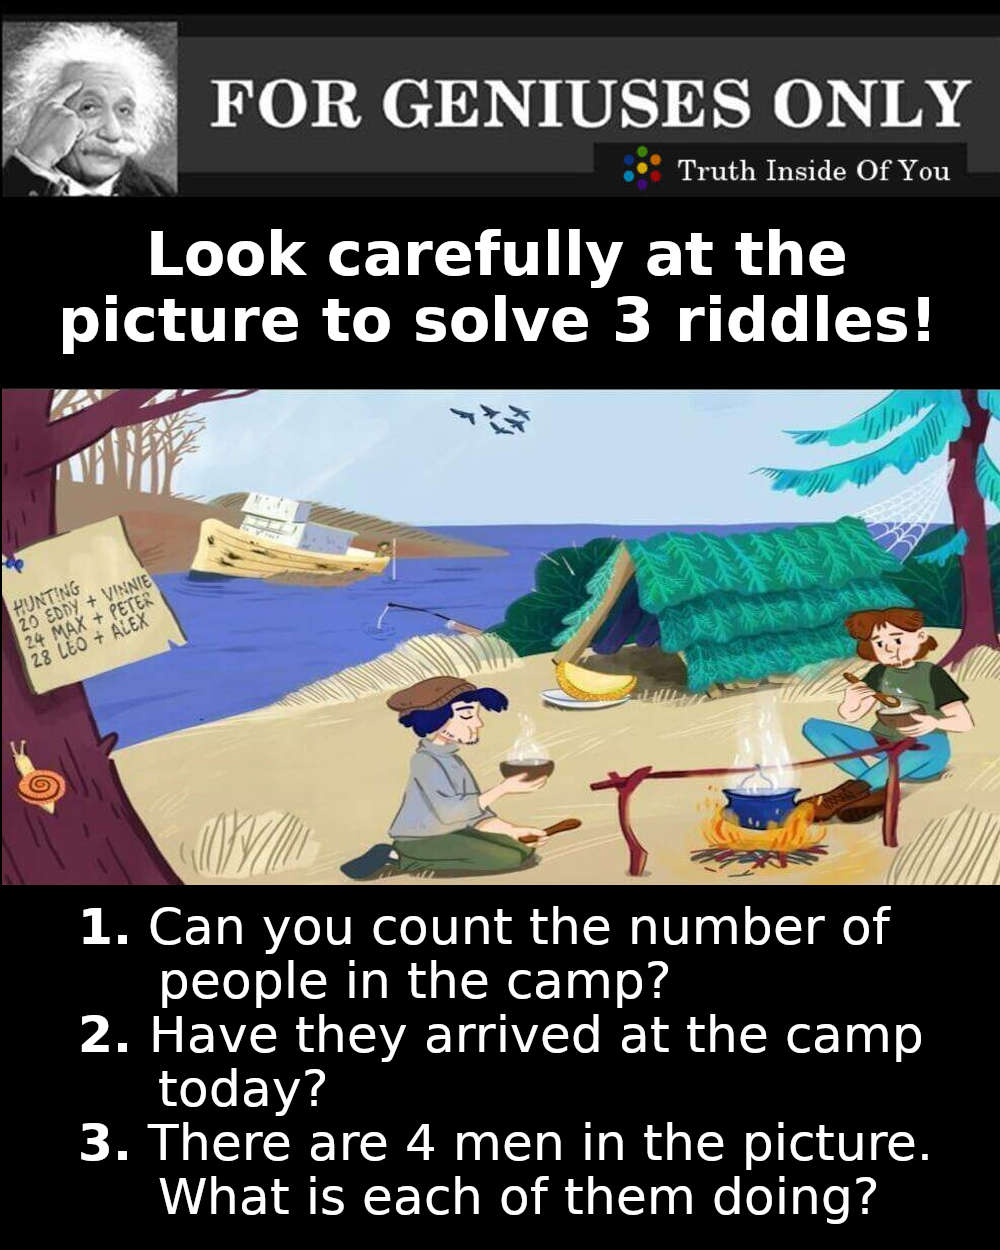 Look Carefully at the picture to solve 3 riddles!